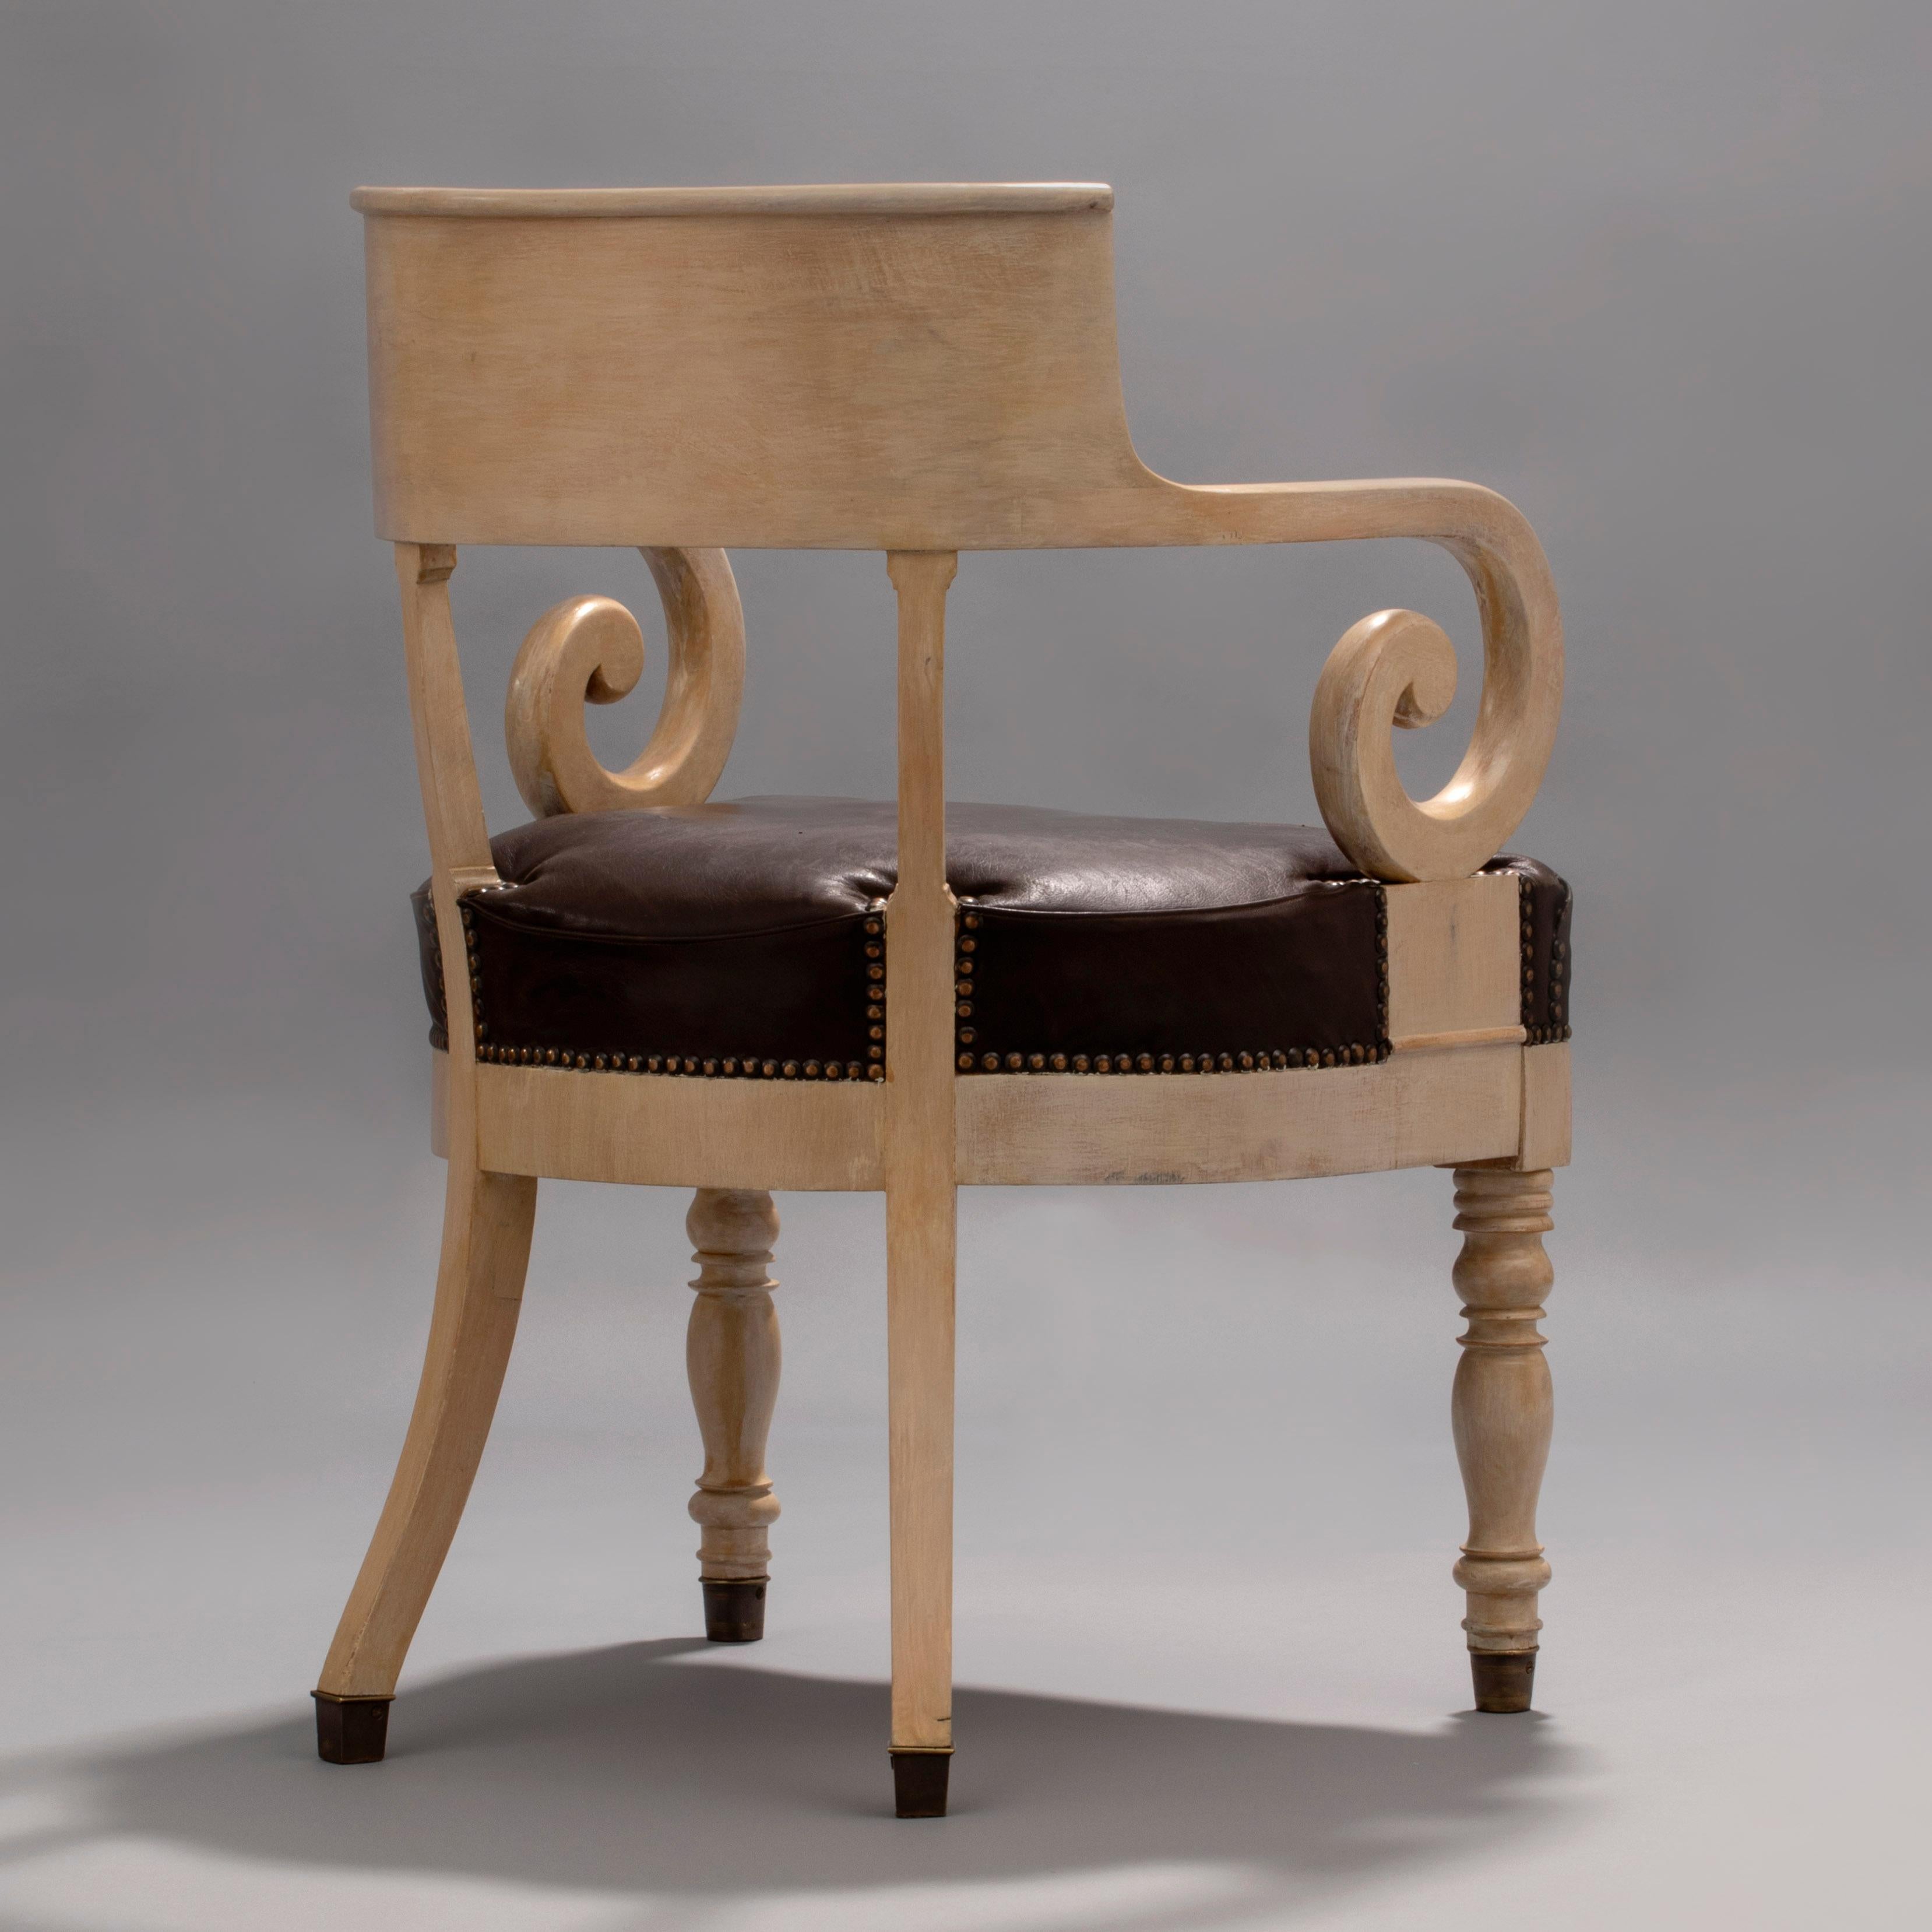 Empire Swedish Ivory-Glazed Birch, Patinated Leather and Brass 19th Century Armchair For Sale